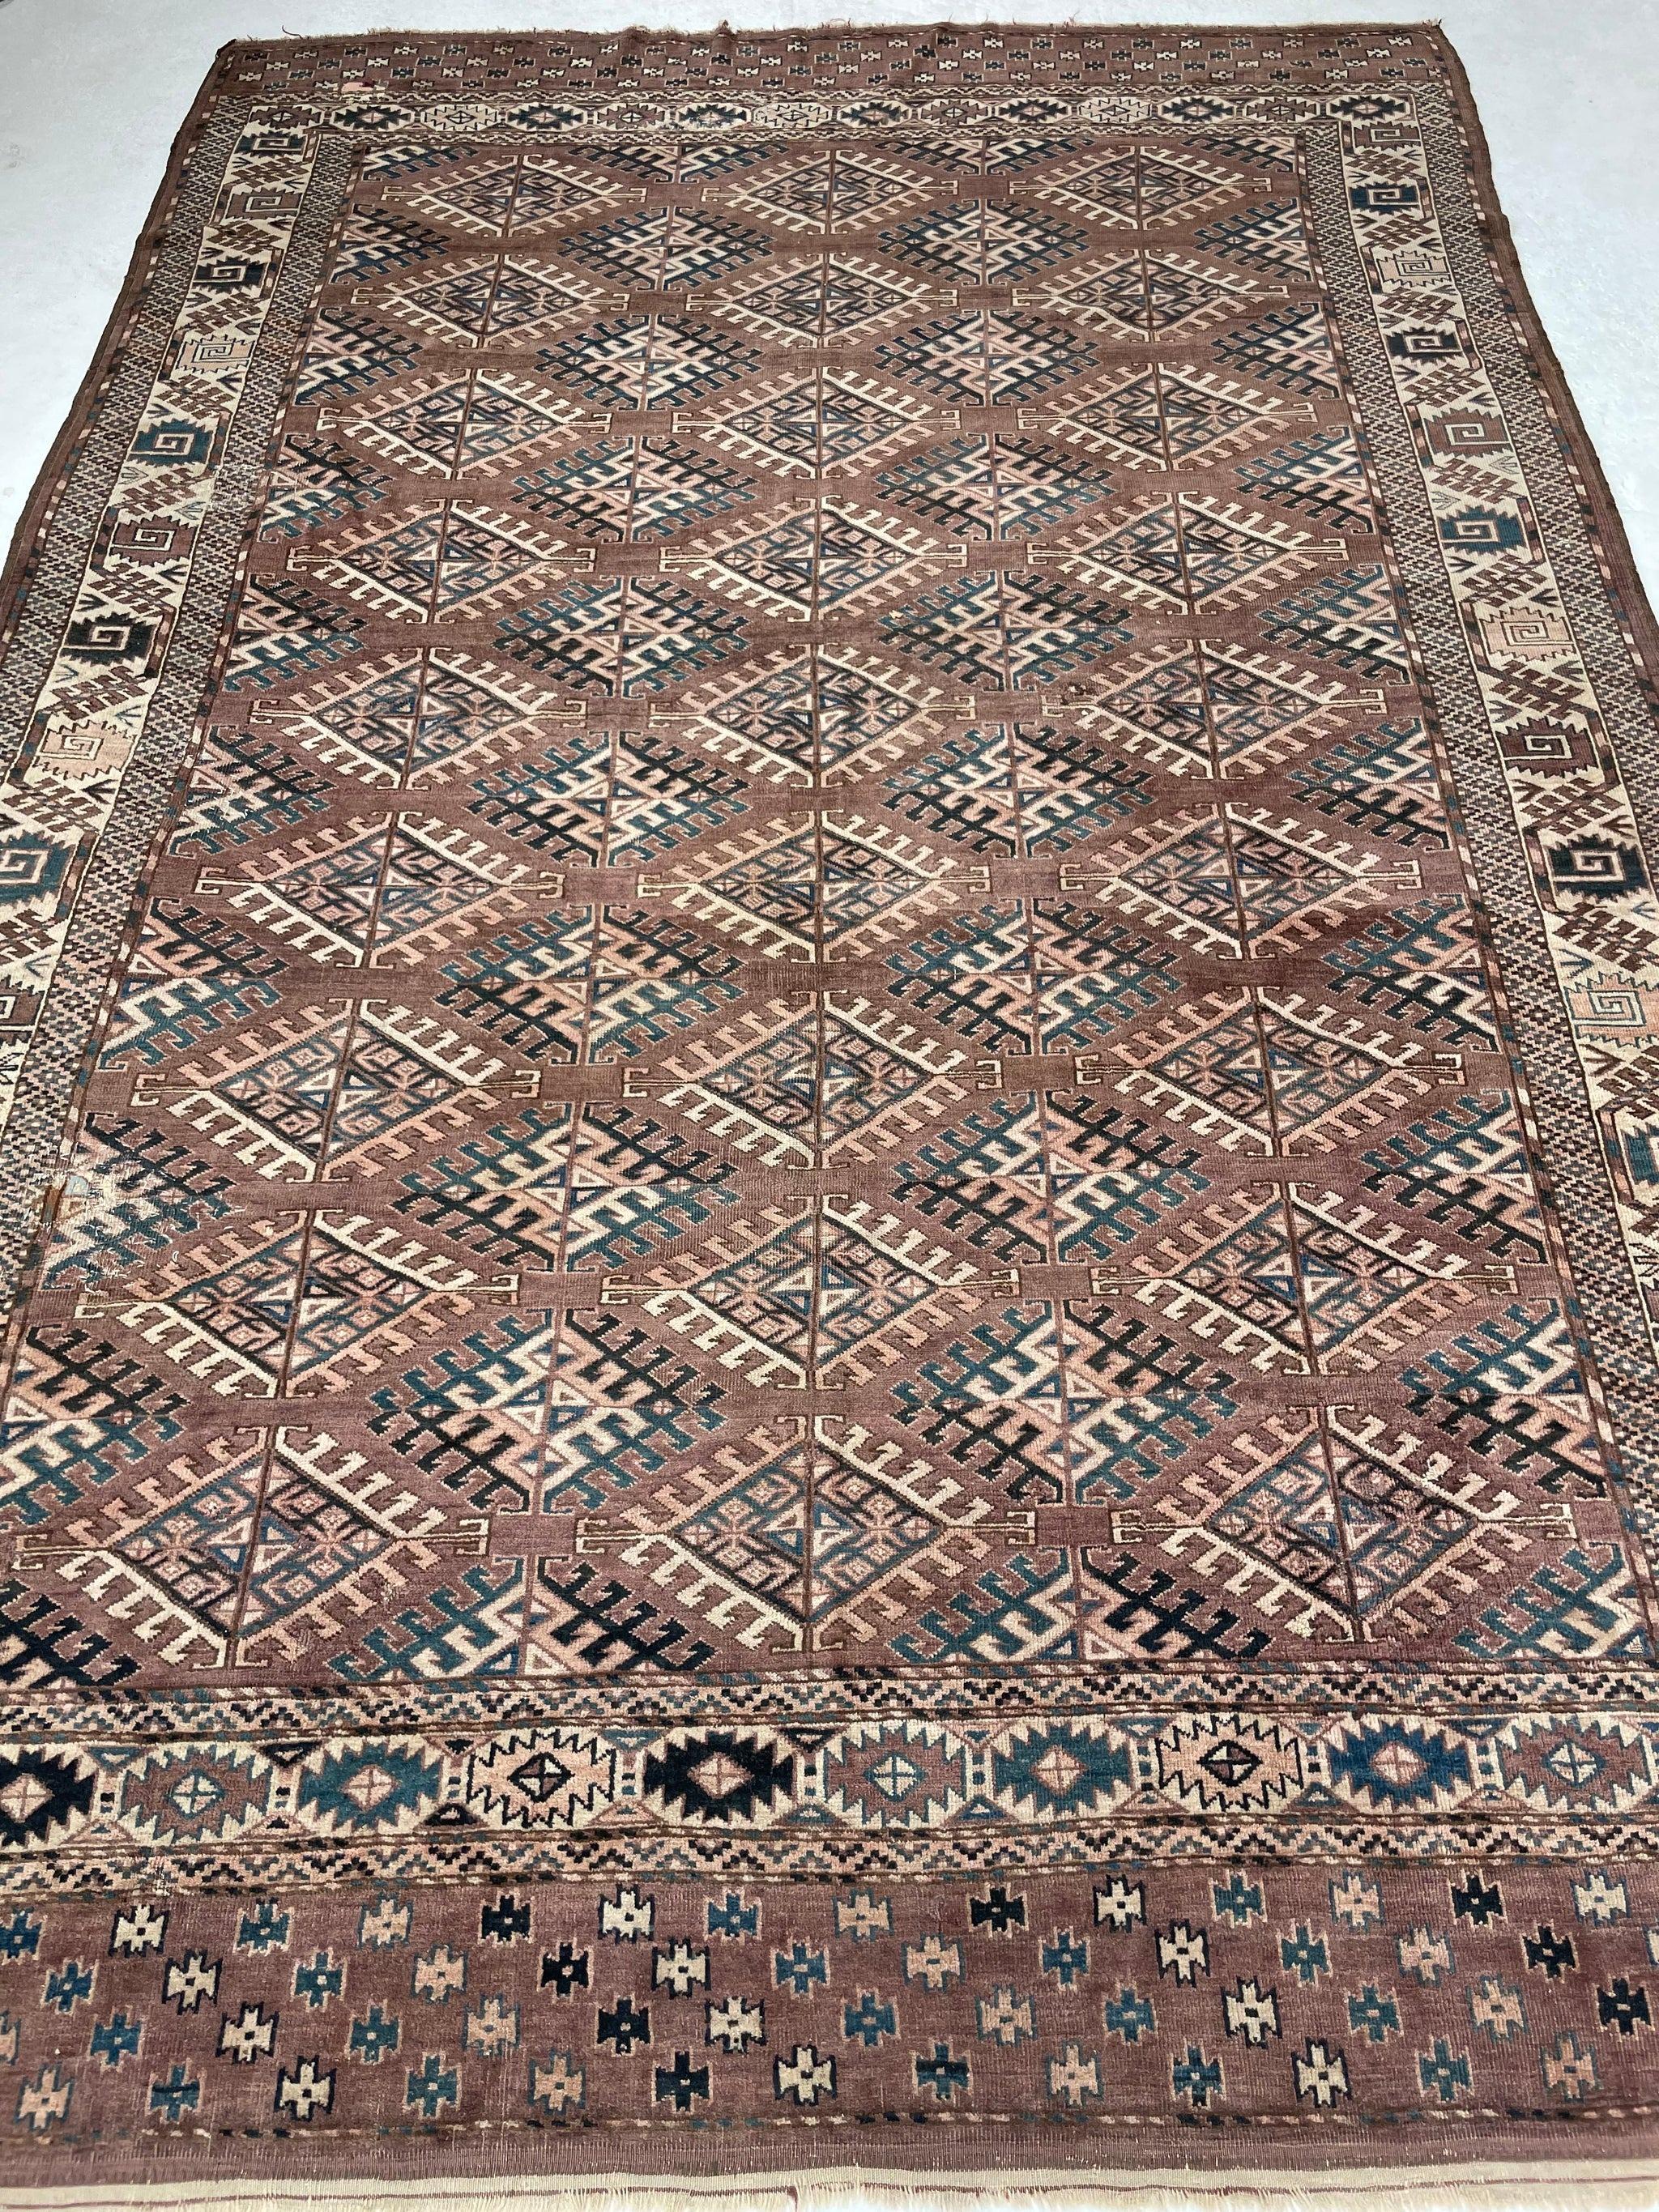 Velvet-Like Antique Tekke  Soft Plum, Peacock Teal, Mocha, Espresso, Linen Beige

About: STOP right there - this Antique Afghan Tekke piece is a Stunning Example of some of the best this village has to offer.  This wool is nearly softer than velvet